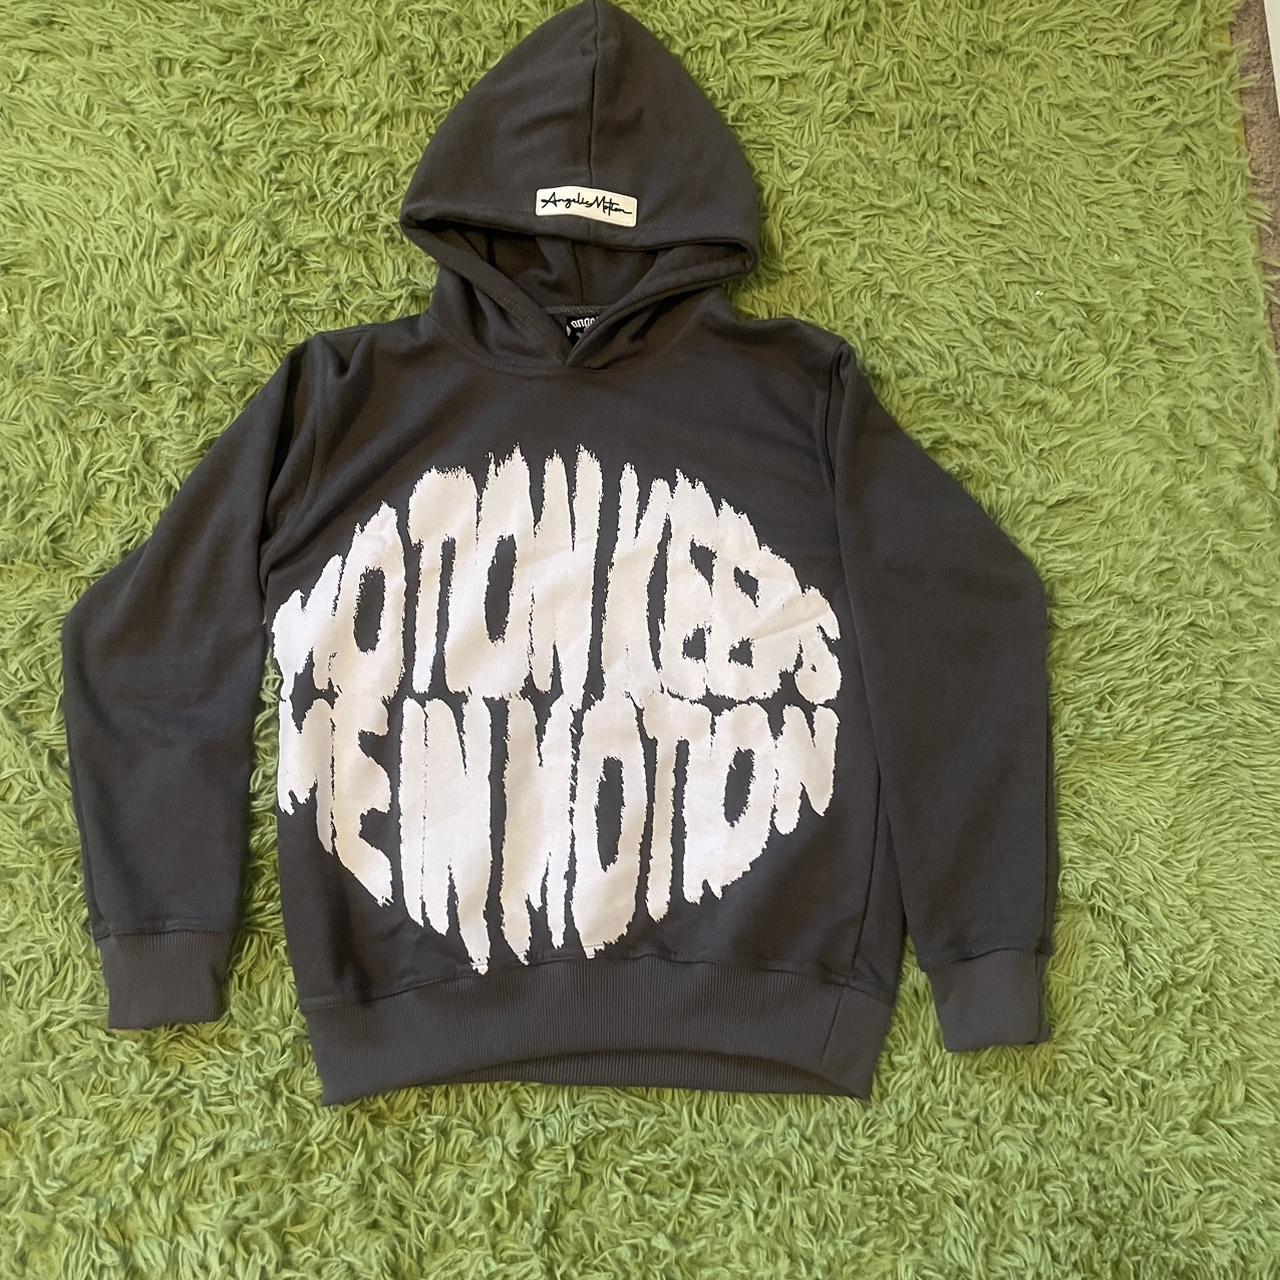 Angelic motion hoodie,never worn,size small,retail... - Depop